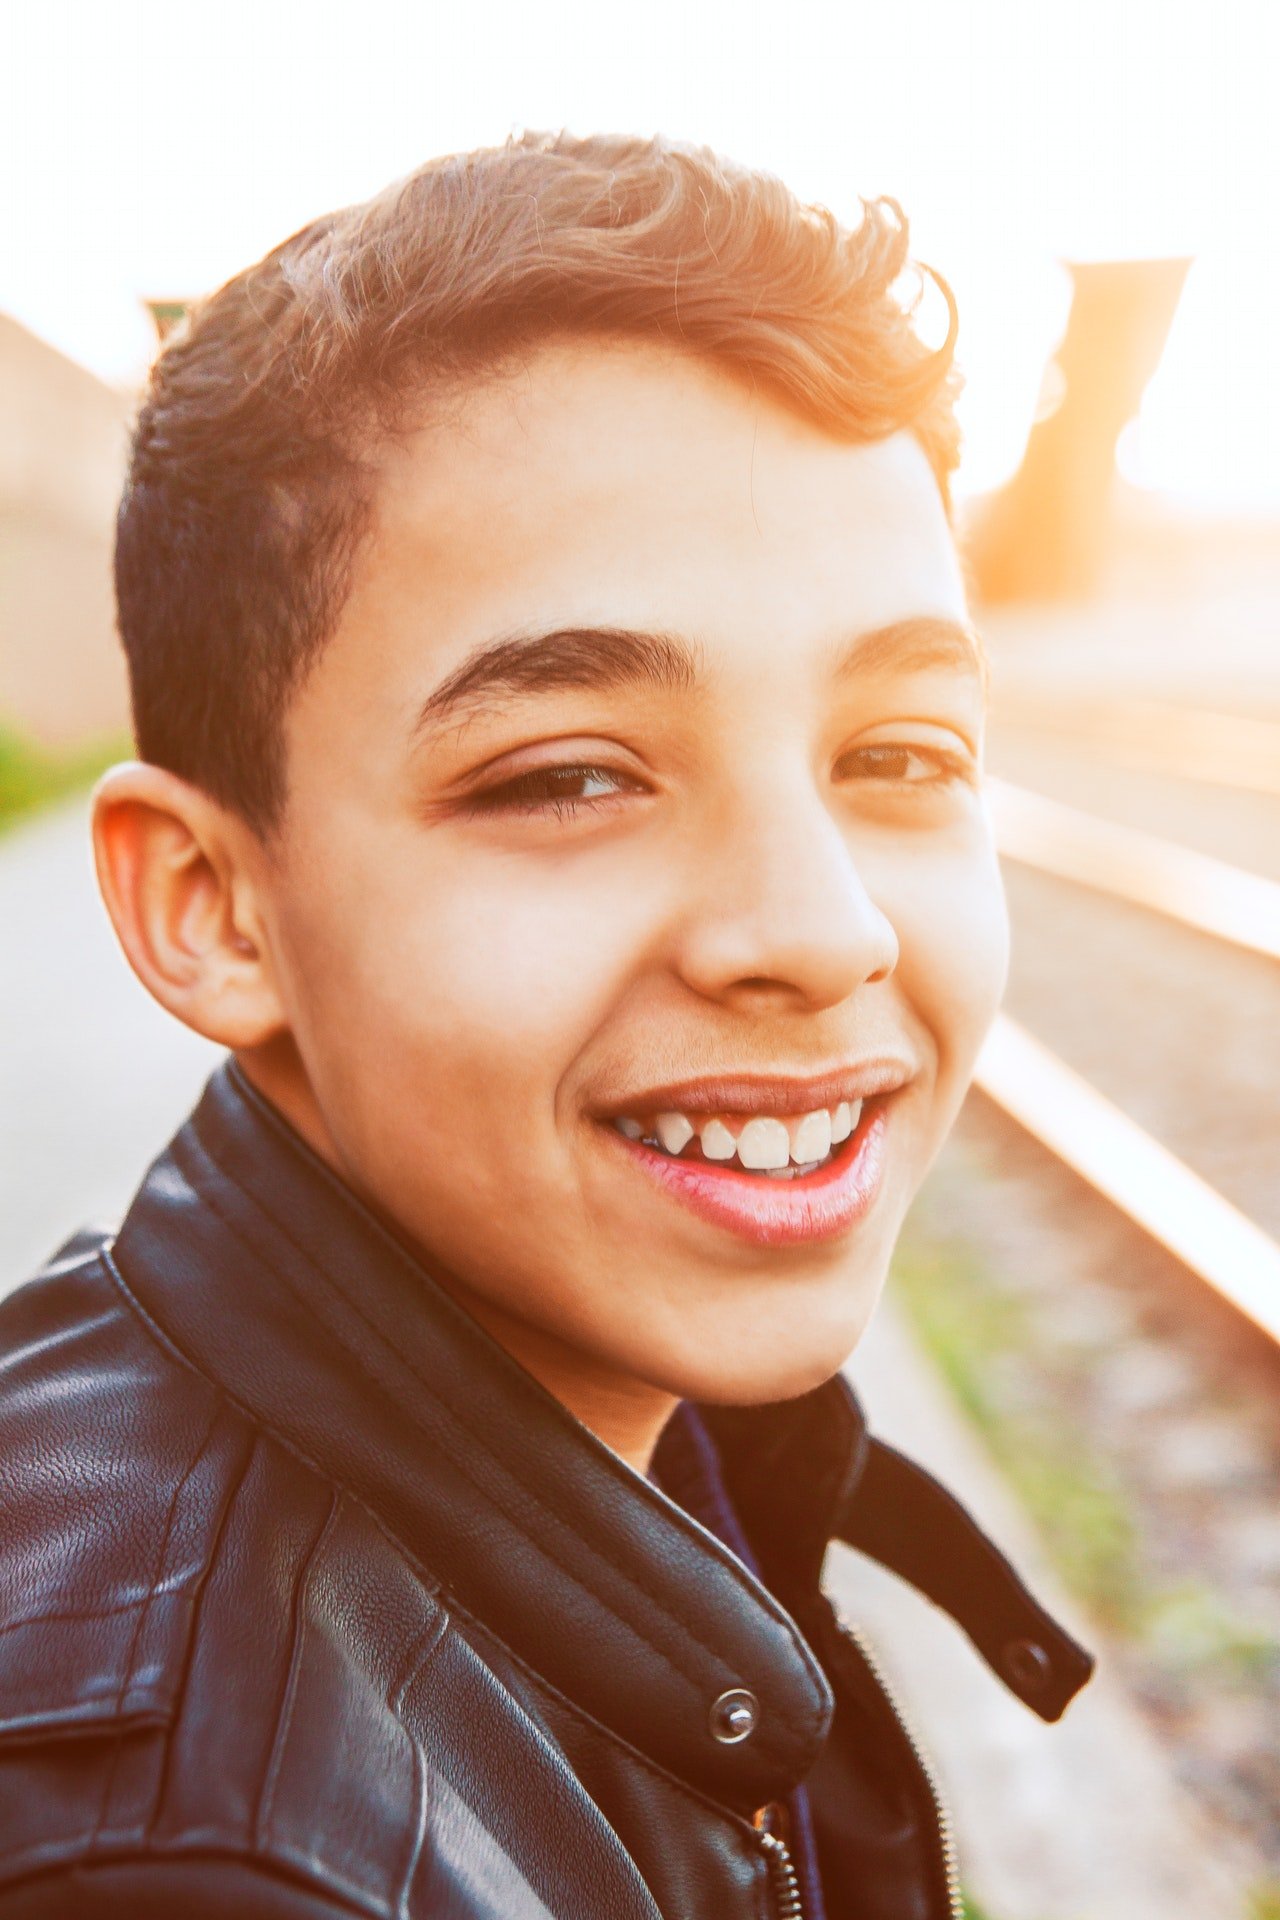 Photo of a young boy | Photo: Pexels